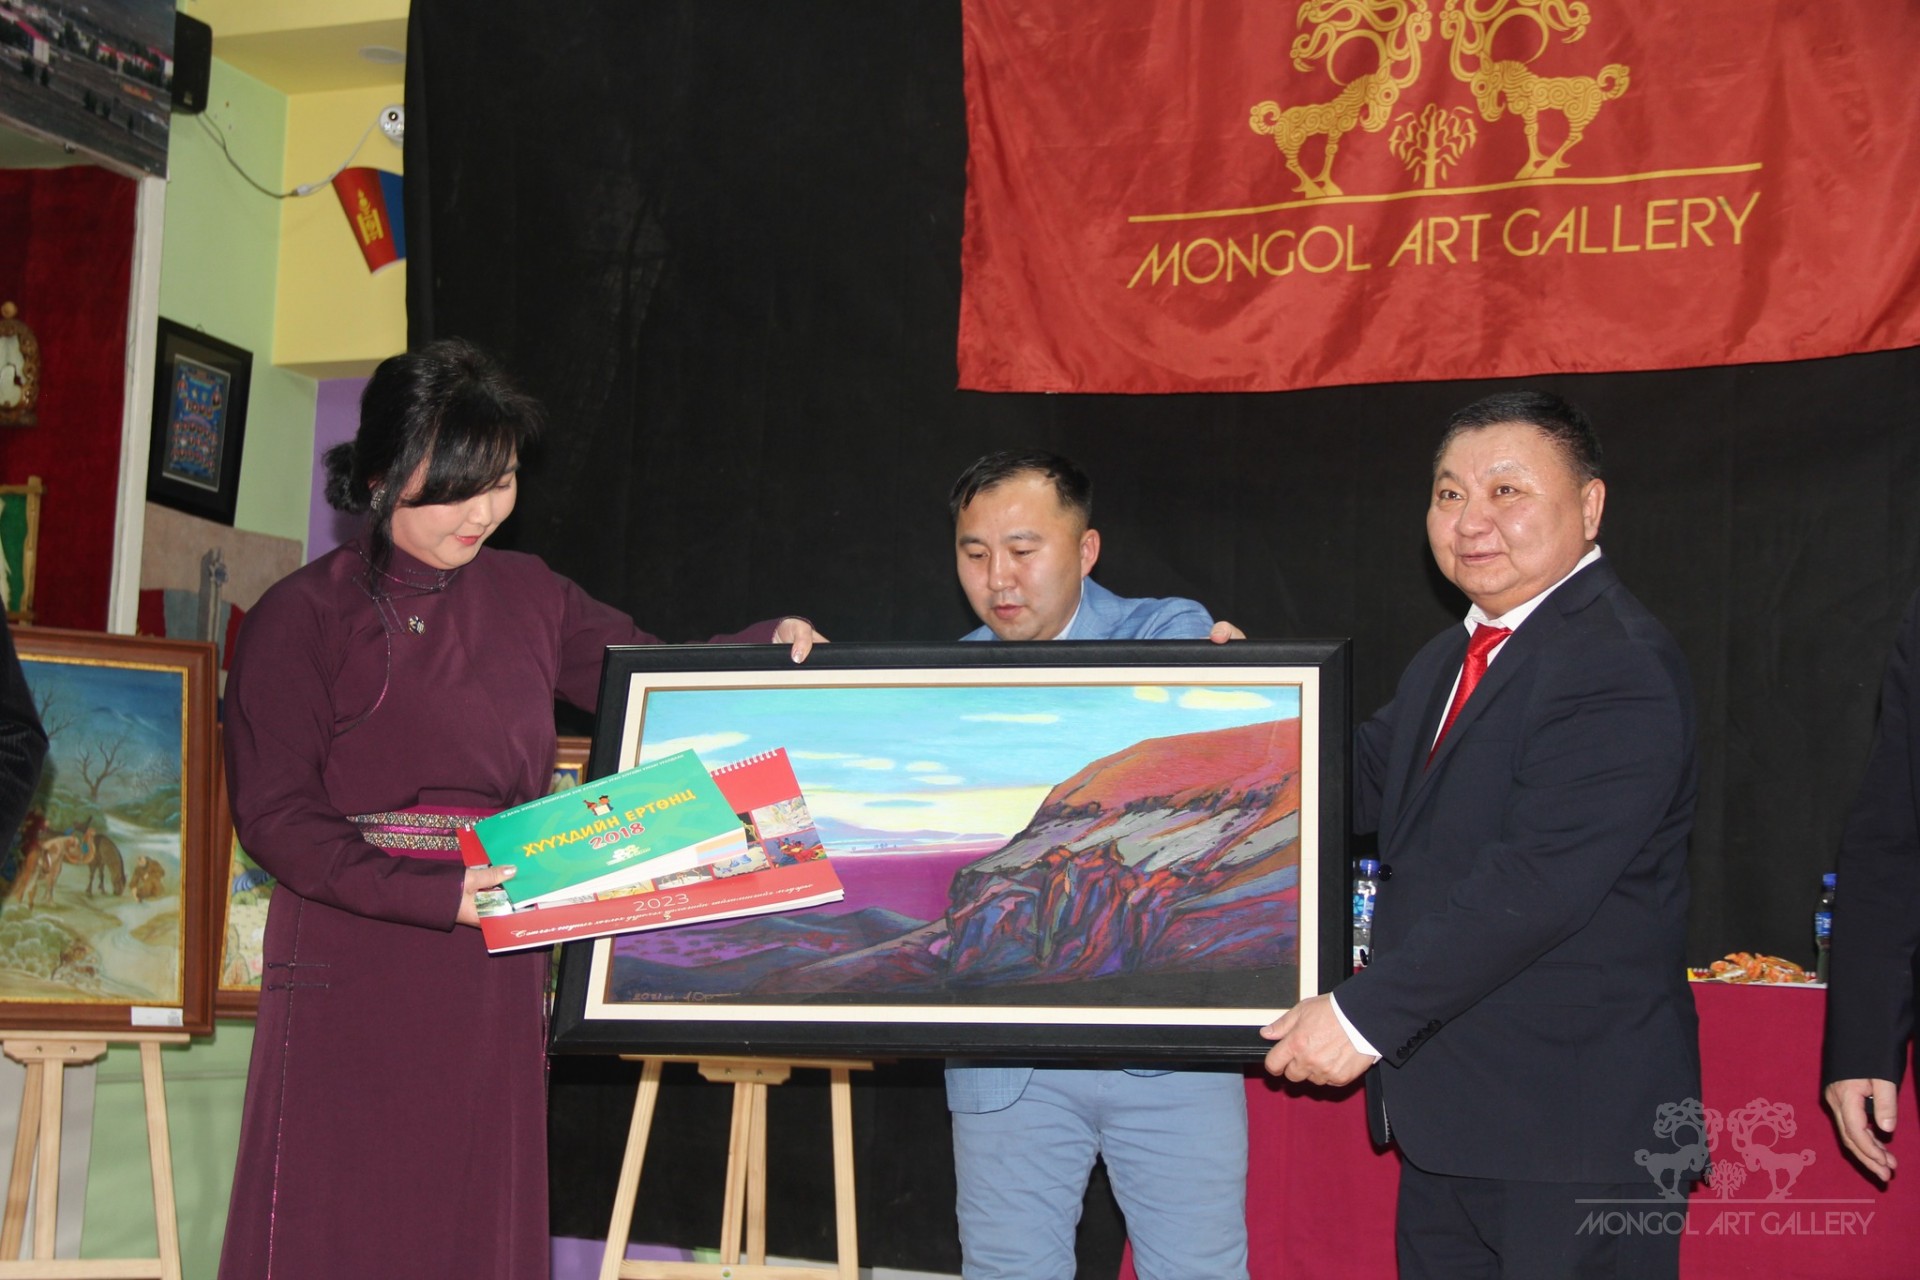 The Travelling Exhibition was presented in Darkhan-Uul provincial Museum.